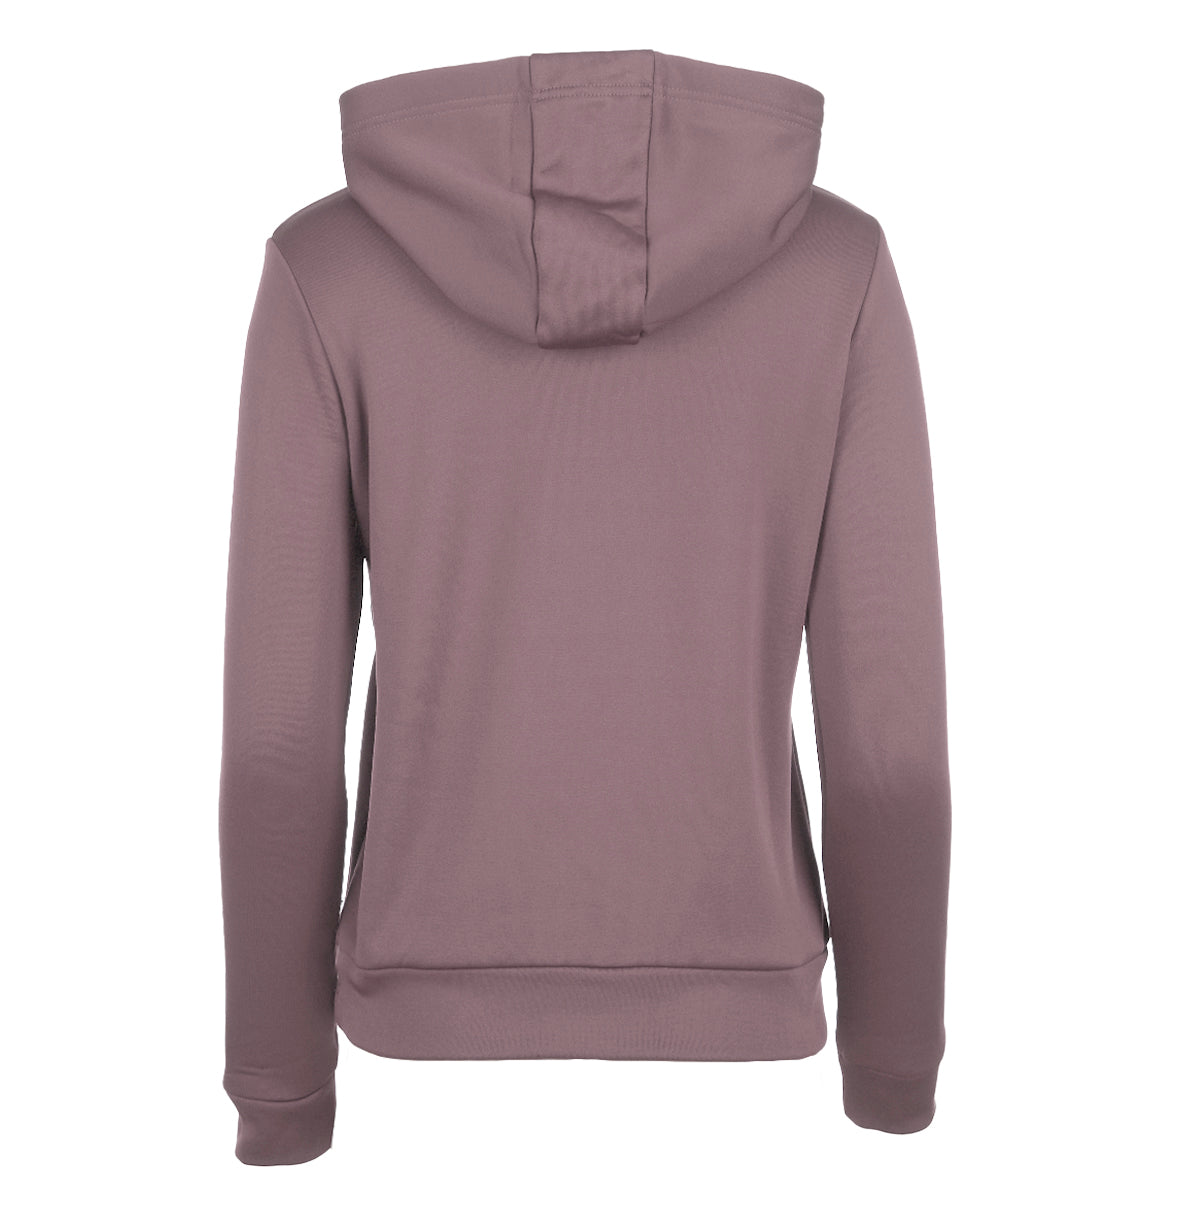 90 Degree by Reflex Scuba Pullover in Lavender - Marlee Janes